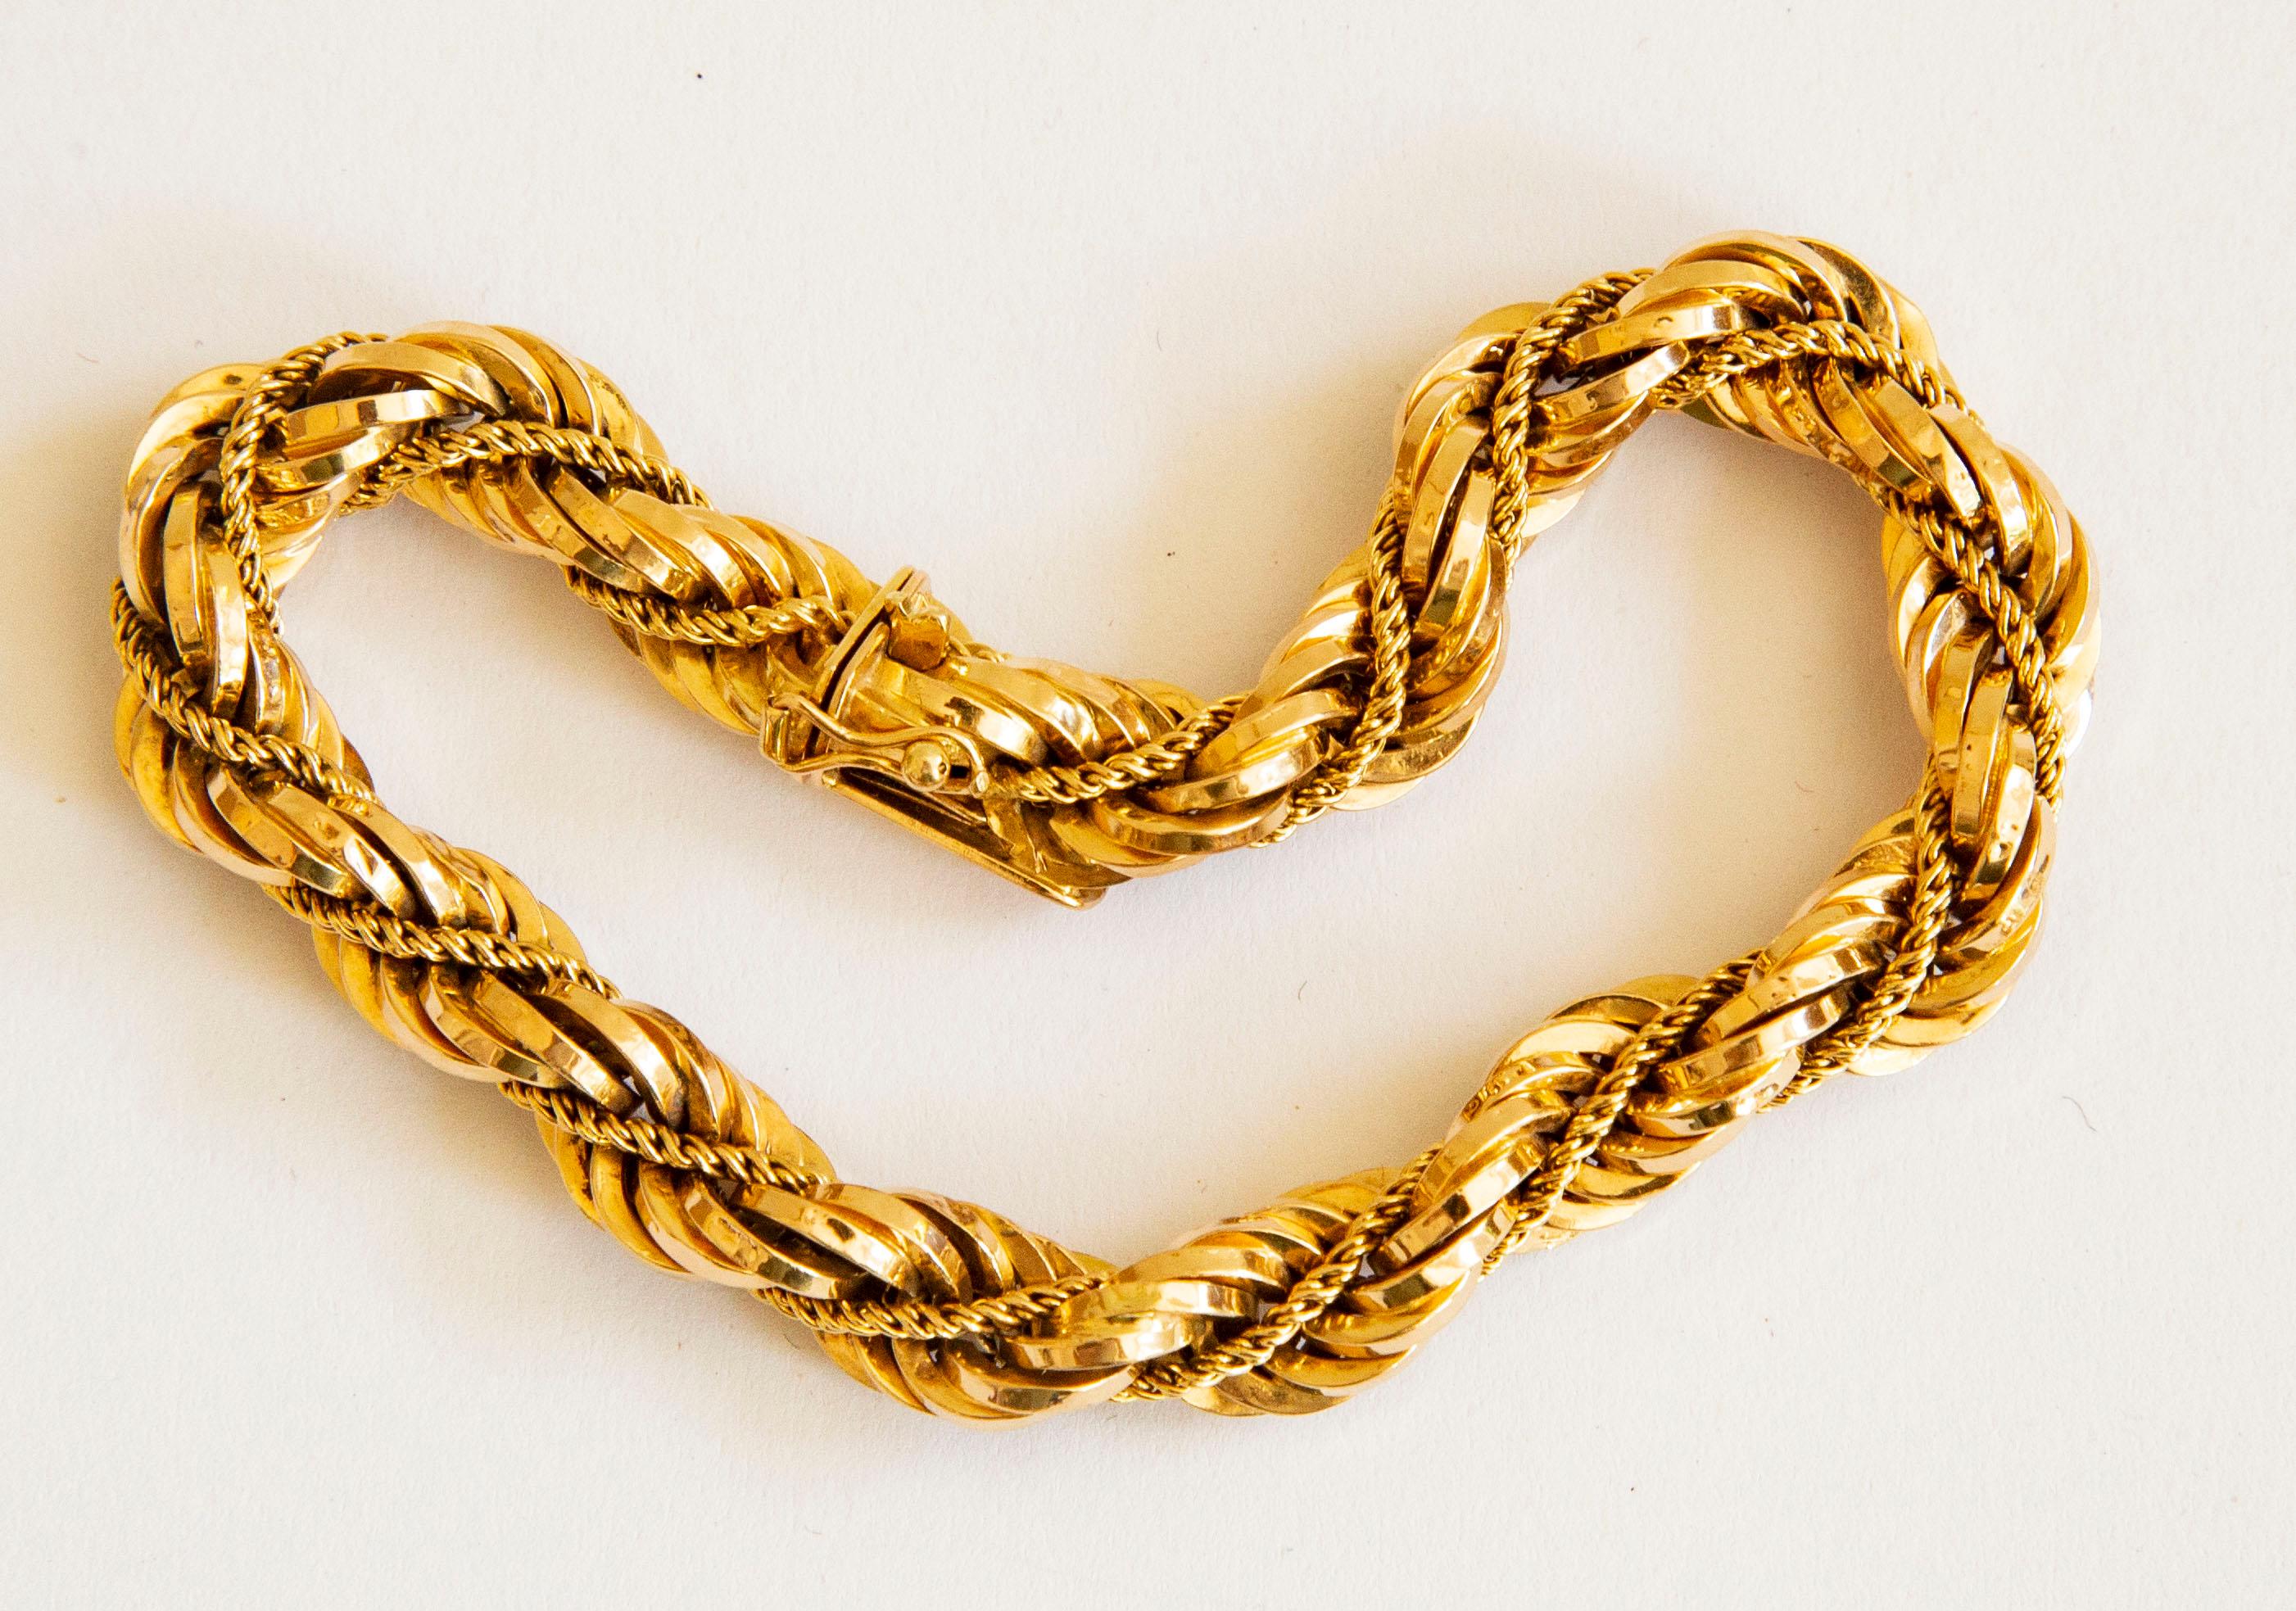 An Italian 18 karat yellow gold twist rope chain/cord bracelet manufactured by UnoAErre in Arezzo, Italy in 1970s. The bracelet features a wide twisted cord intertwined with a single and a narrow cord. The bracelet closes with a box lock with the